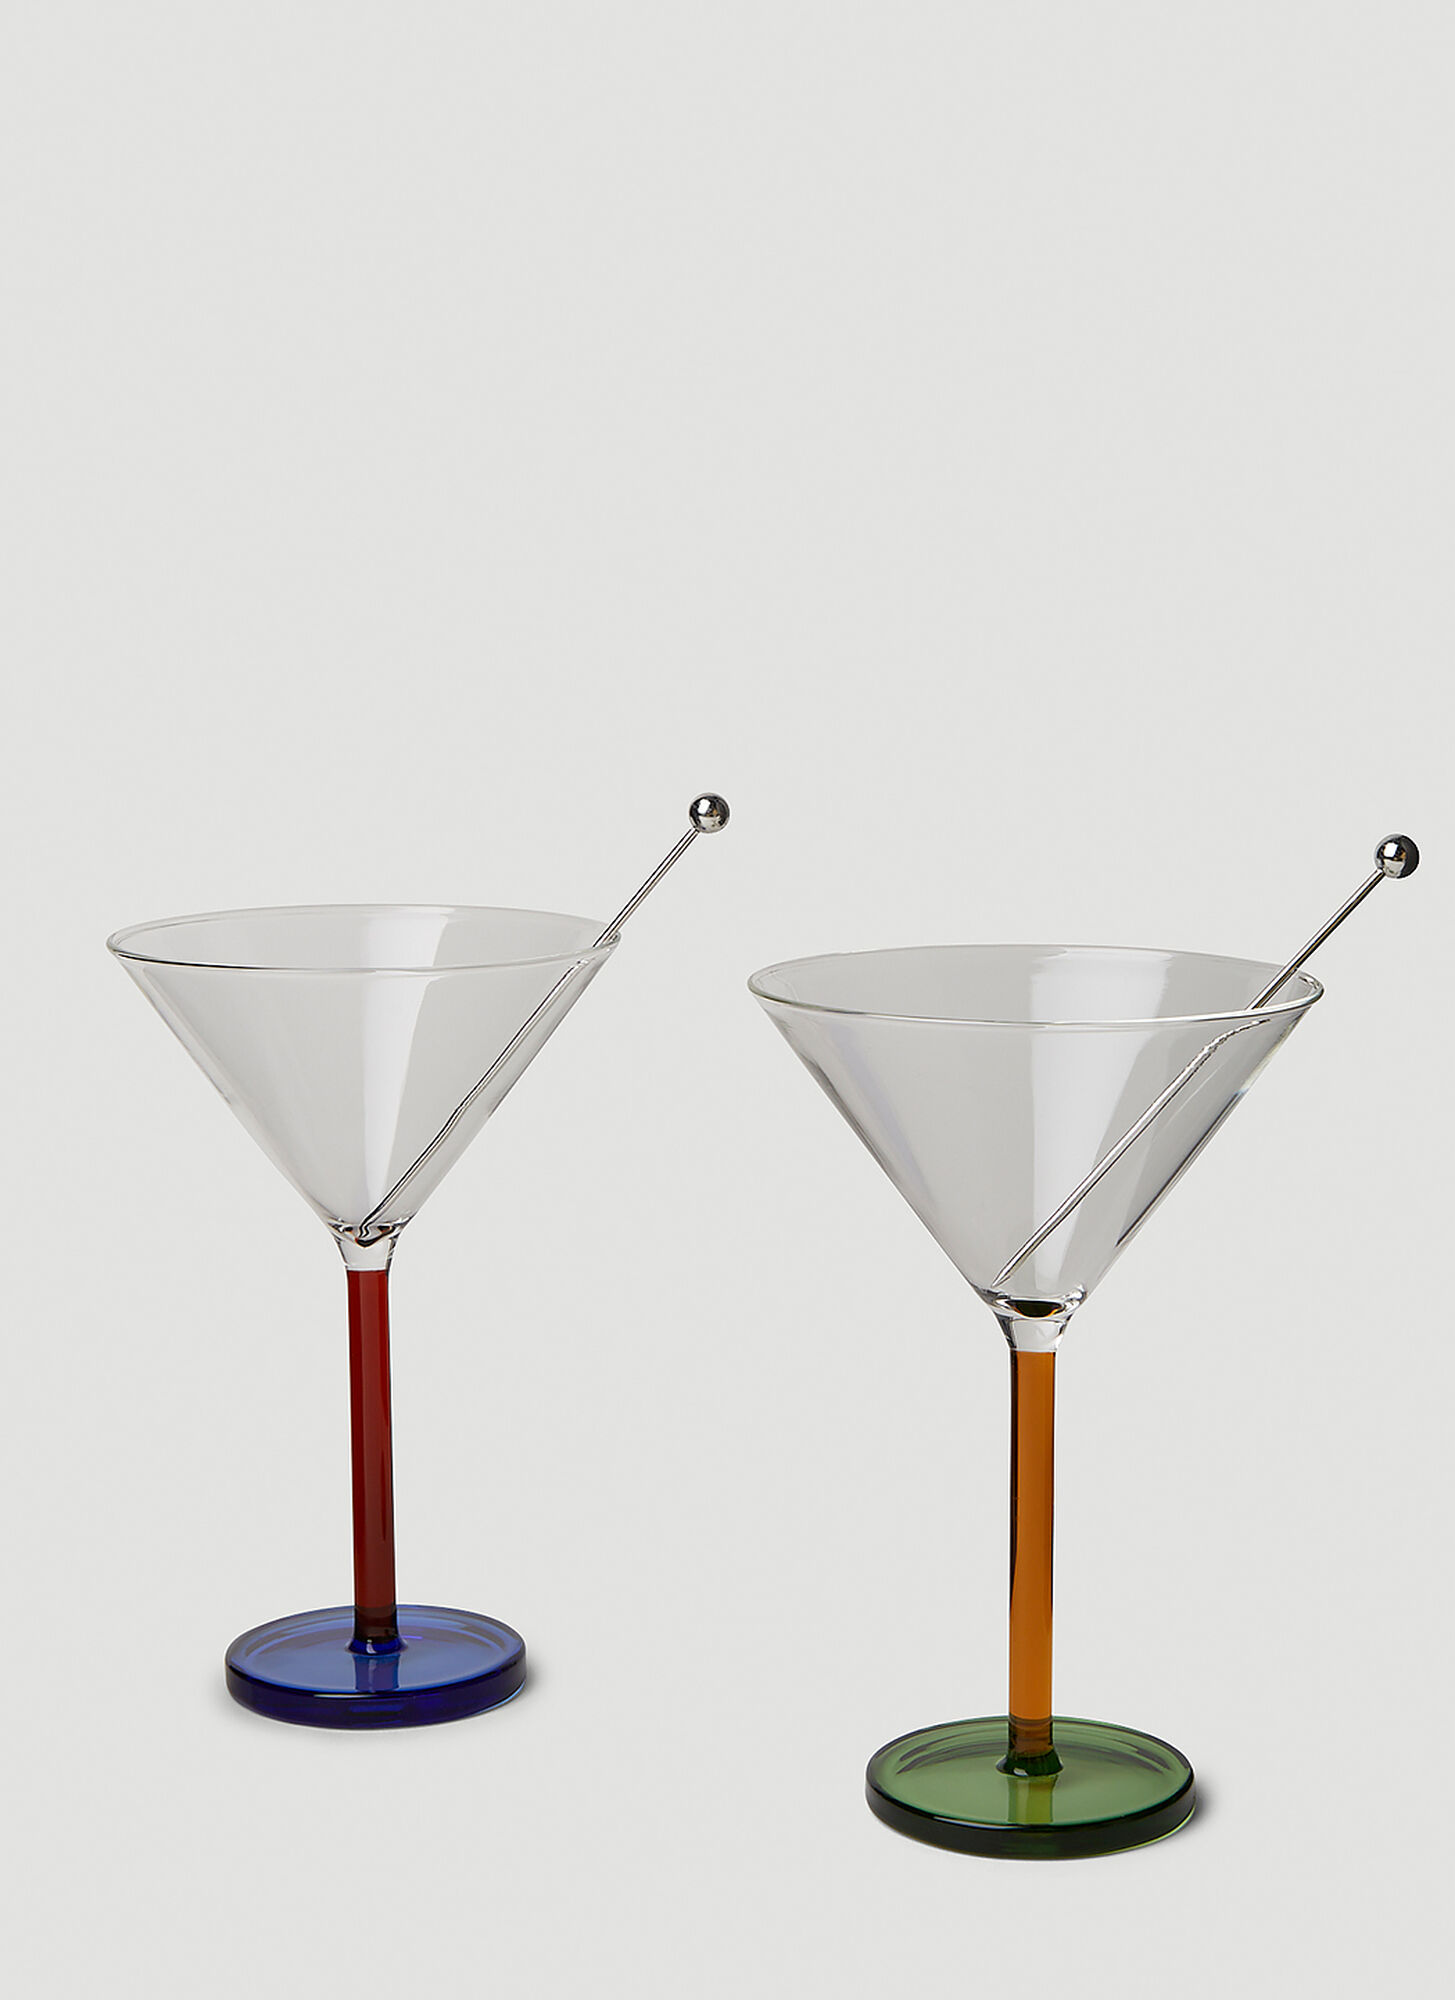 SOPHIE LOU JACOBSEN PIANO SET OF TWO COCKTAIL GLASSES